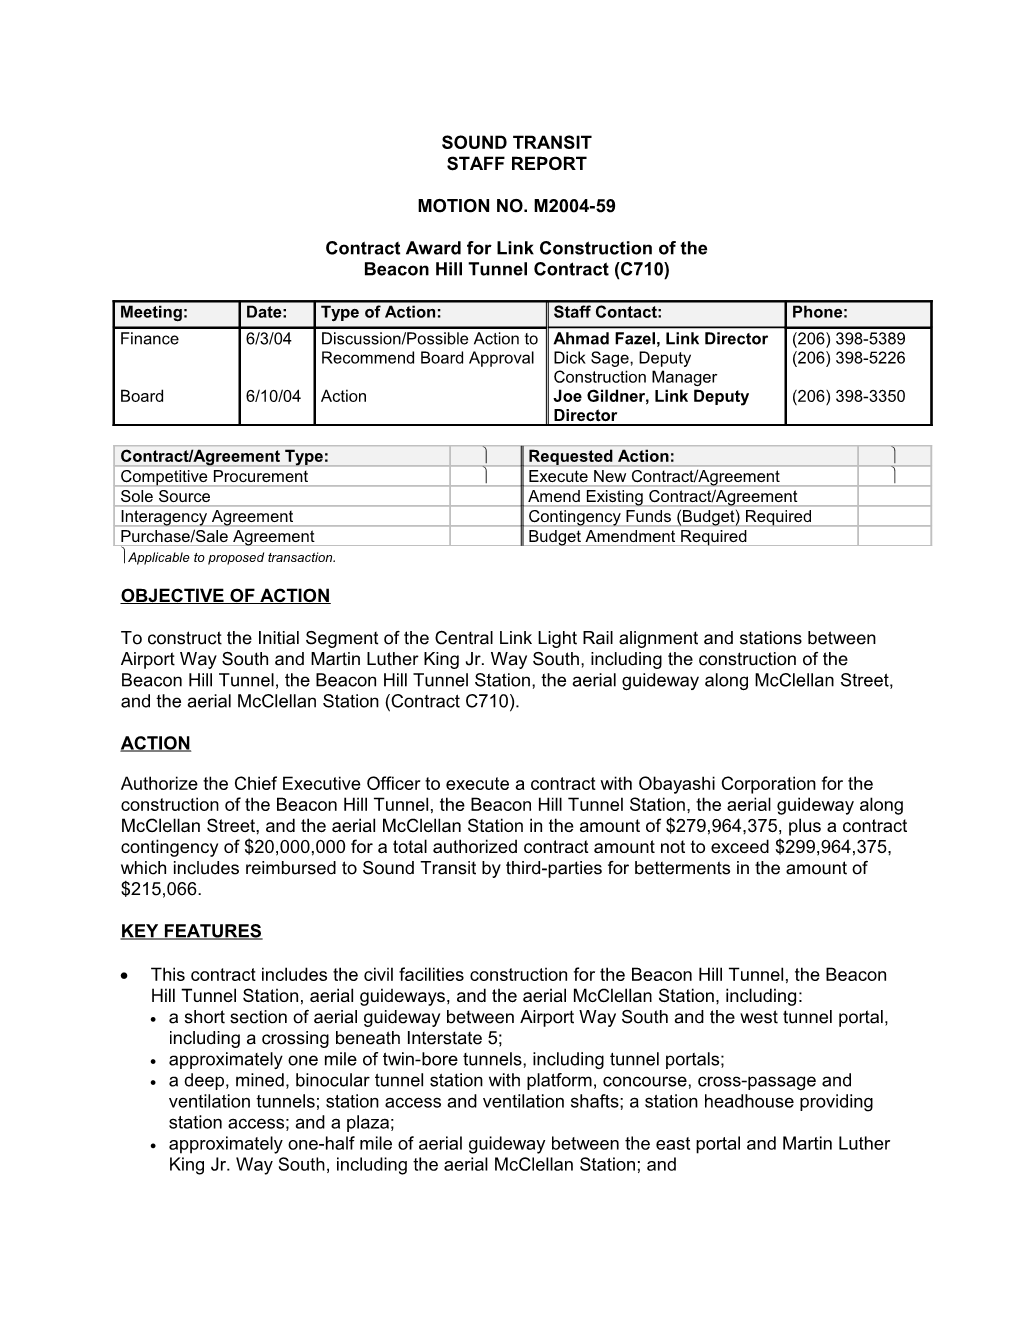 Contract Award for Link Construction of the Beacon Hill Tunnel Contract (C710)